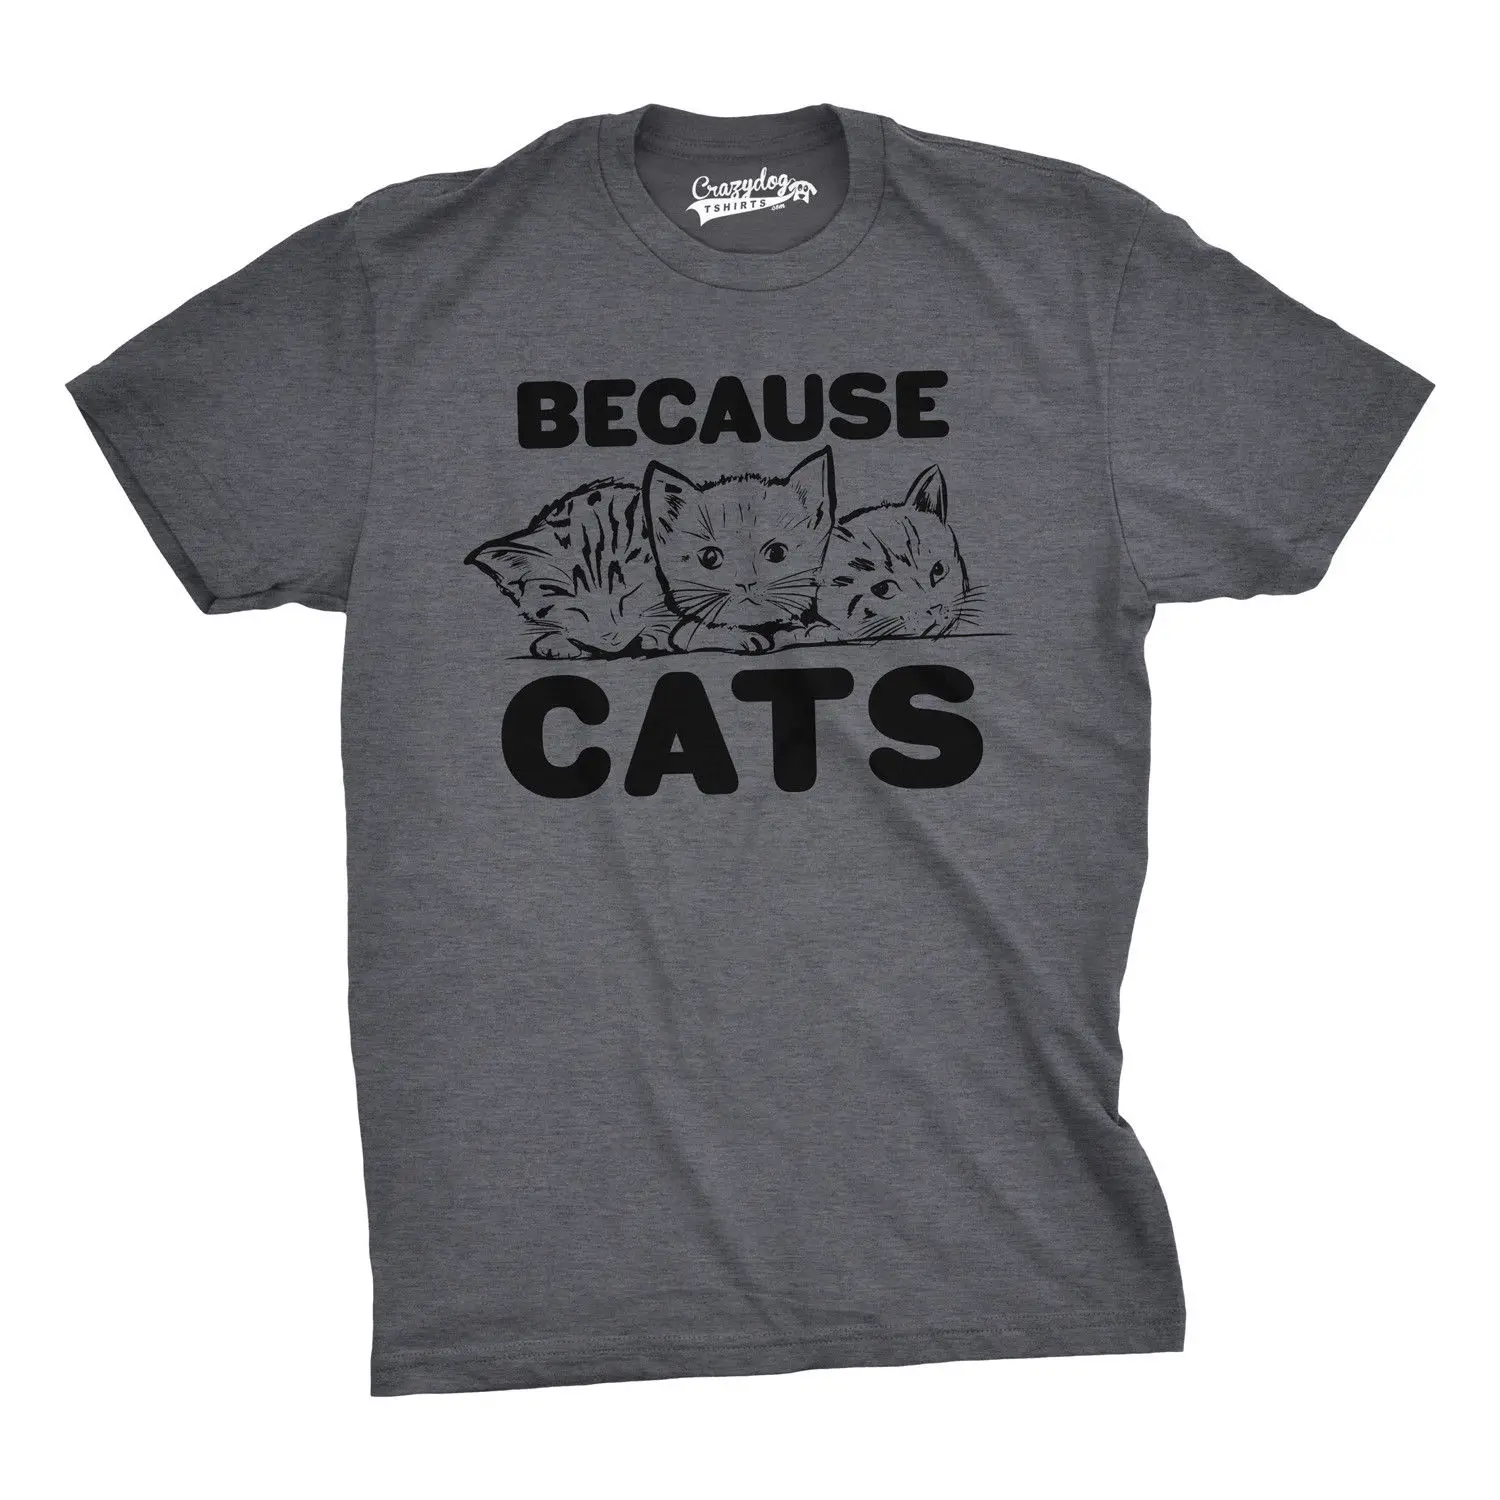 2019 New Summer Funny T shirt Mens Because Cats Funny Crazy Cat Person ...